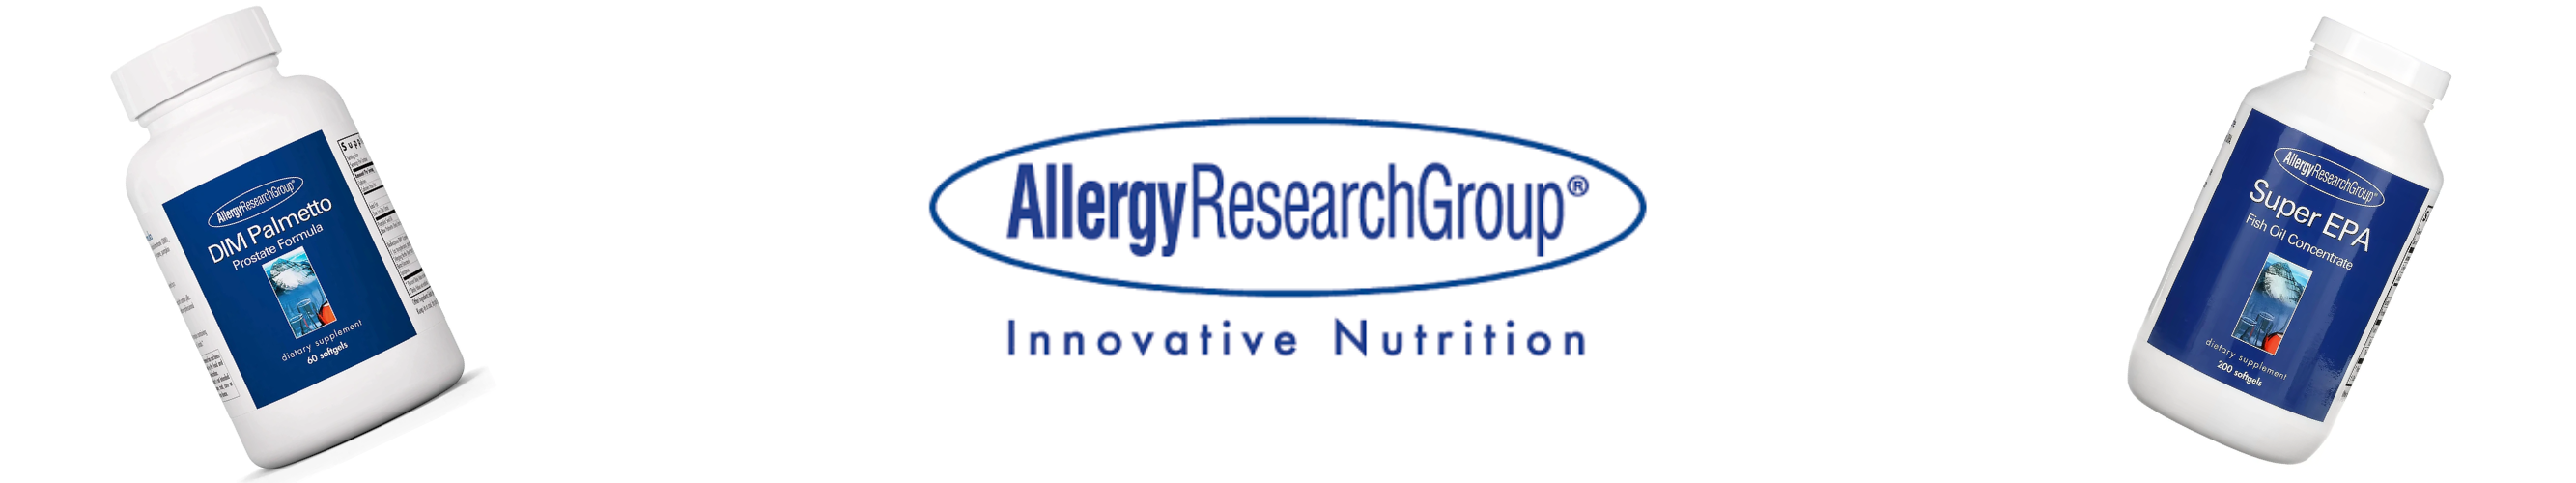 HiLife Vitamins | Allergy Research Group